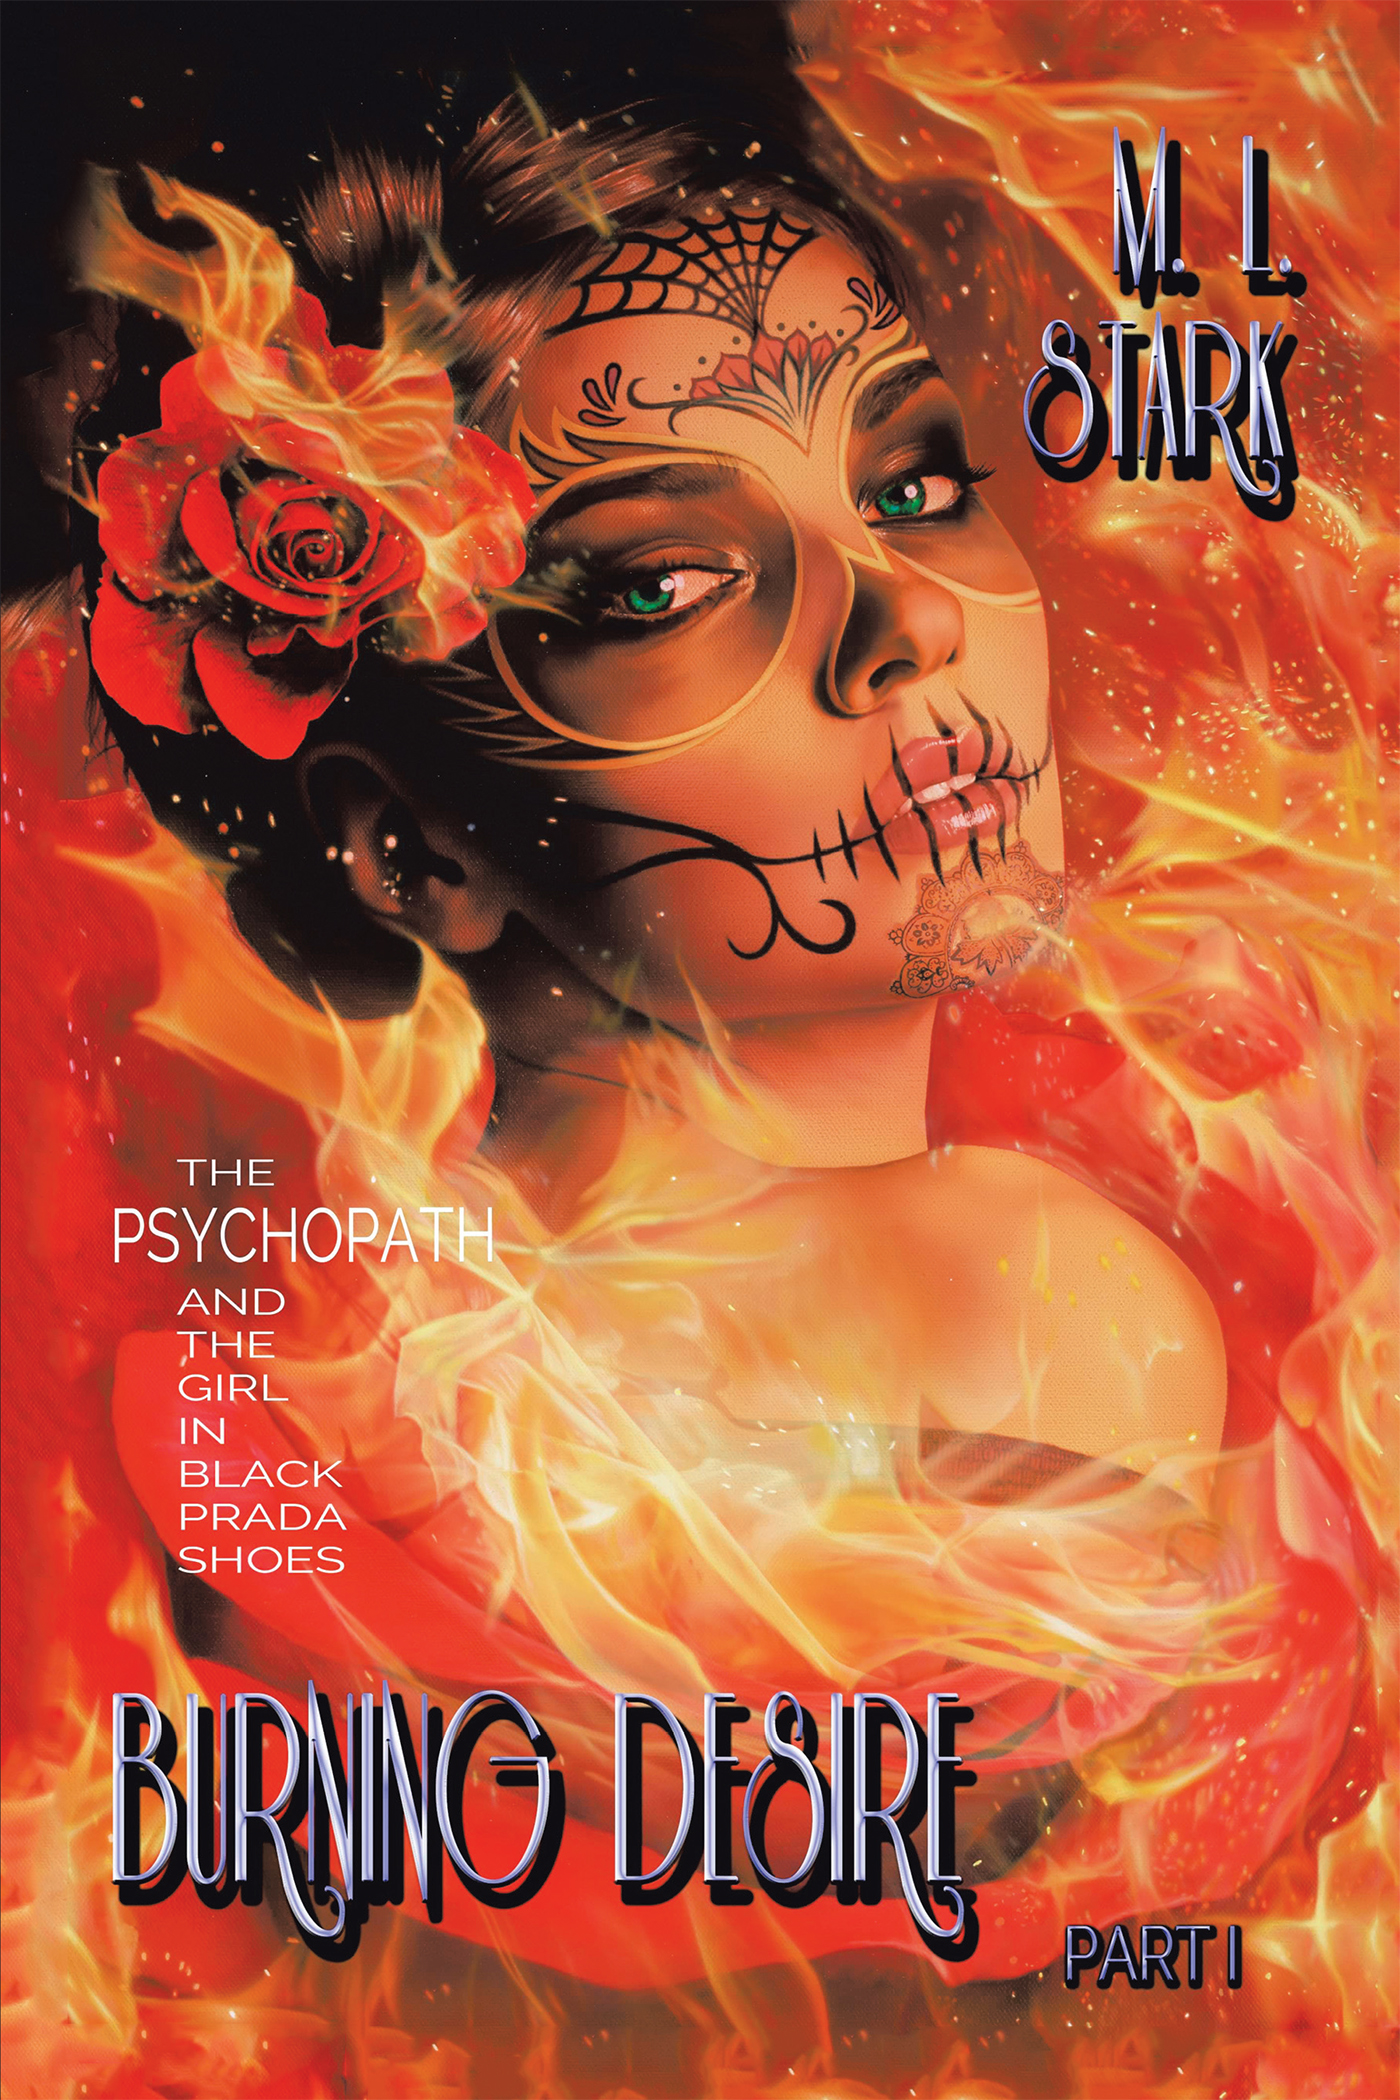 “Burning Desire: The Psychopath and the Girl in Black Prada Shoes Part I” by M. L. Stark    
